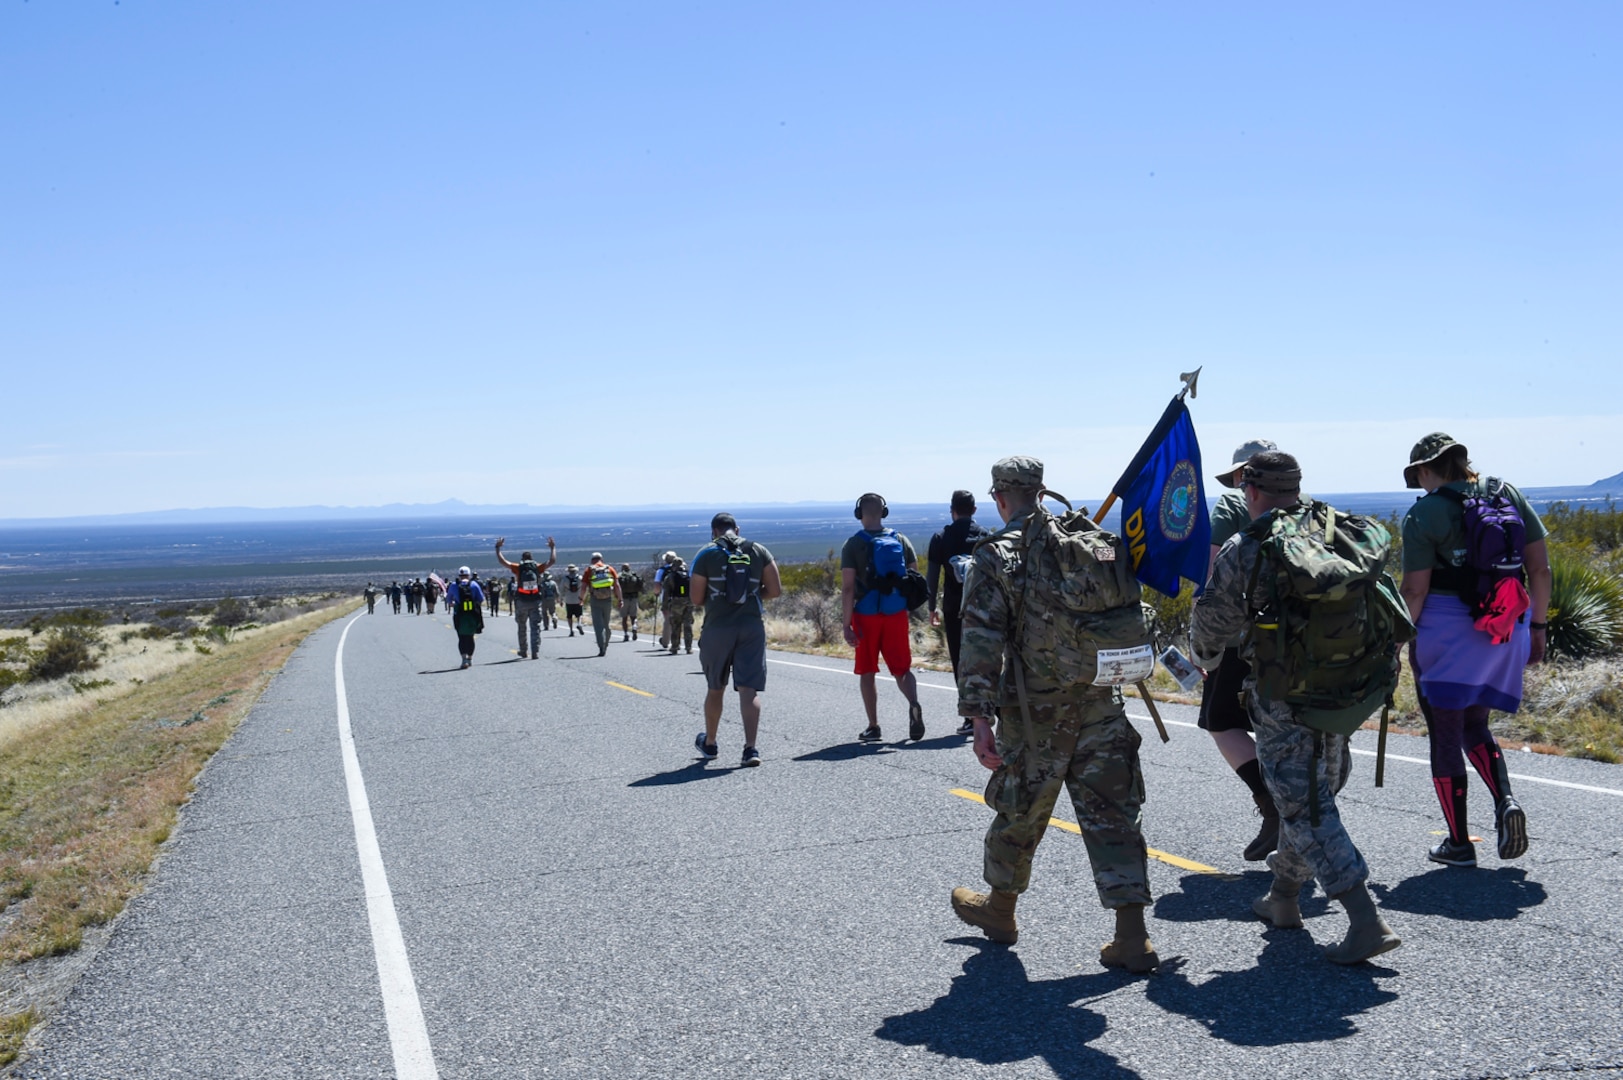 This year, 24 members of the Defense Intelligence Agency joined the more than 8,600 people who participated in the 30th annual Bataan Memorial Death March, in White Sands, New Mexico, March 17, 2019.